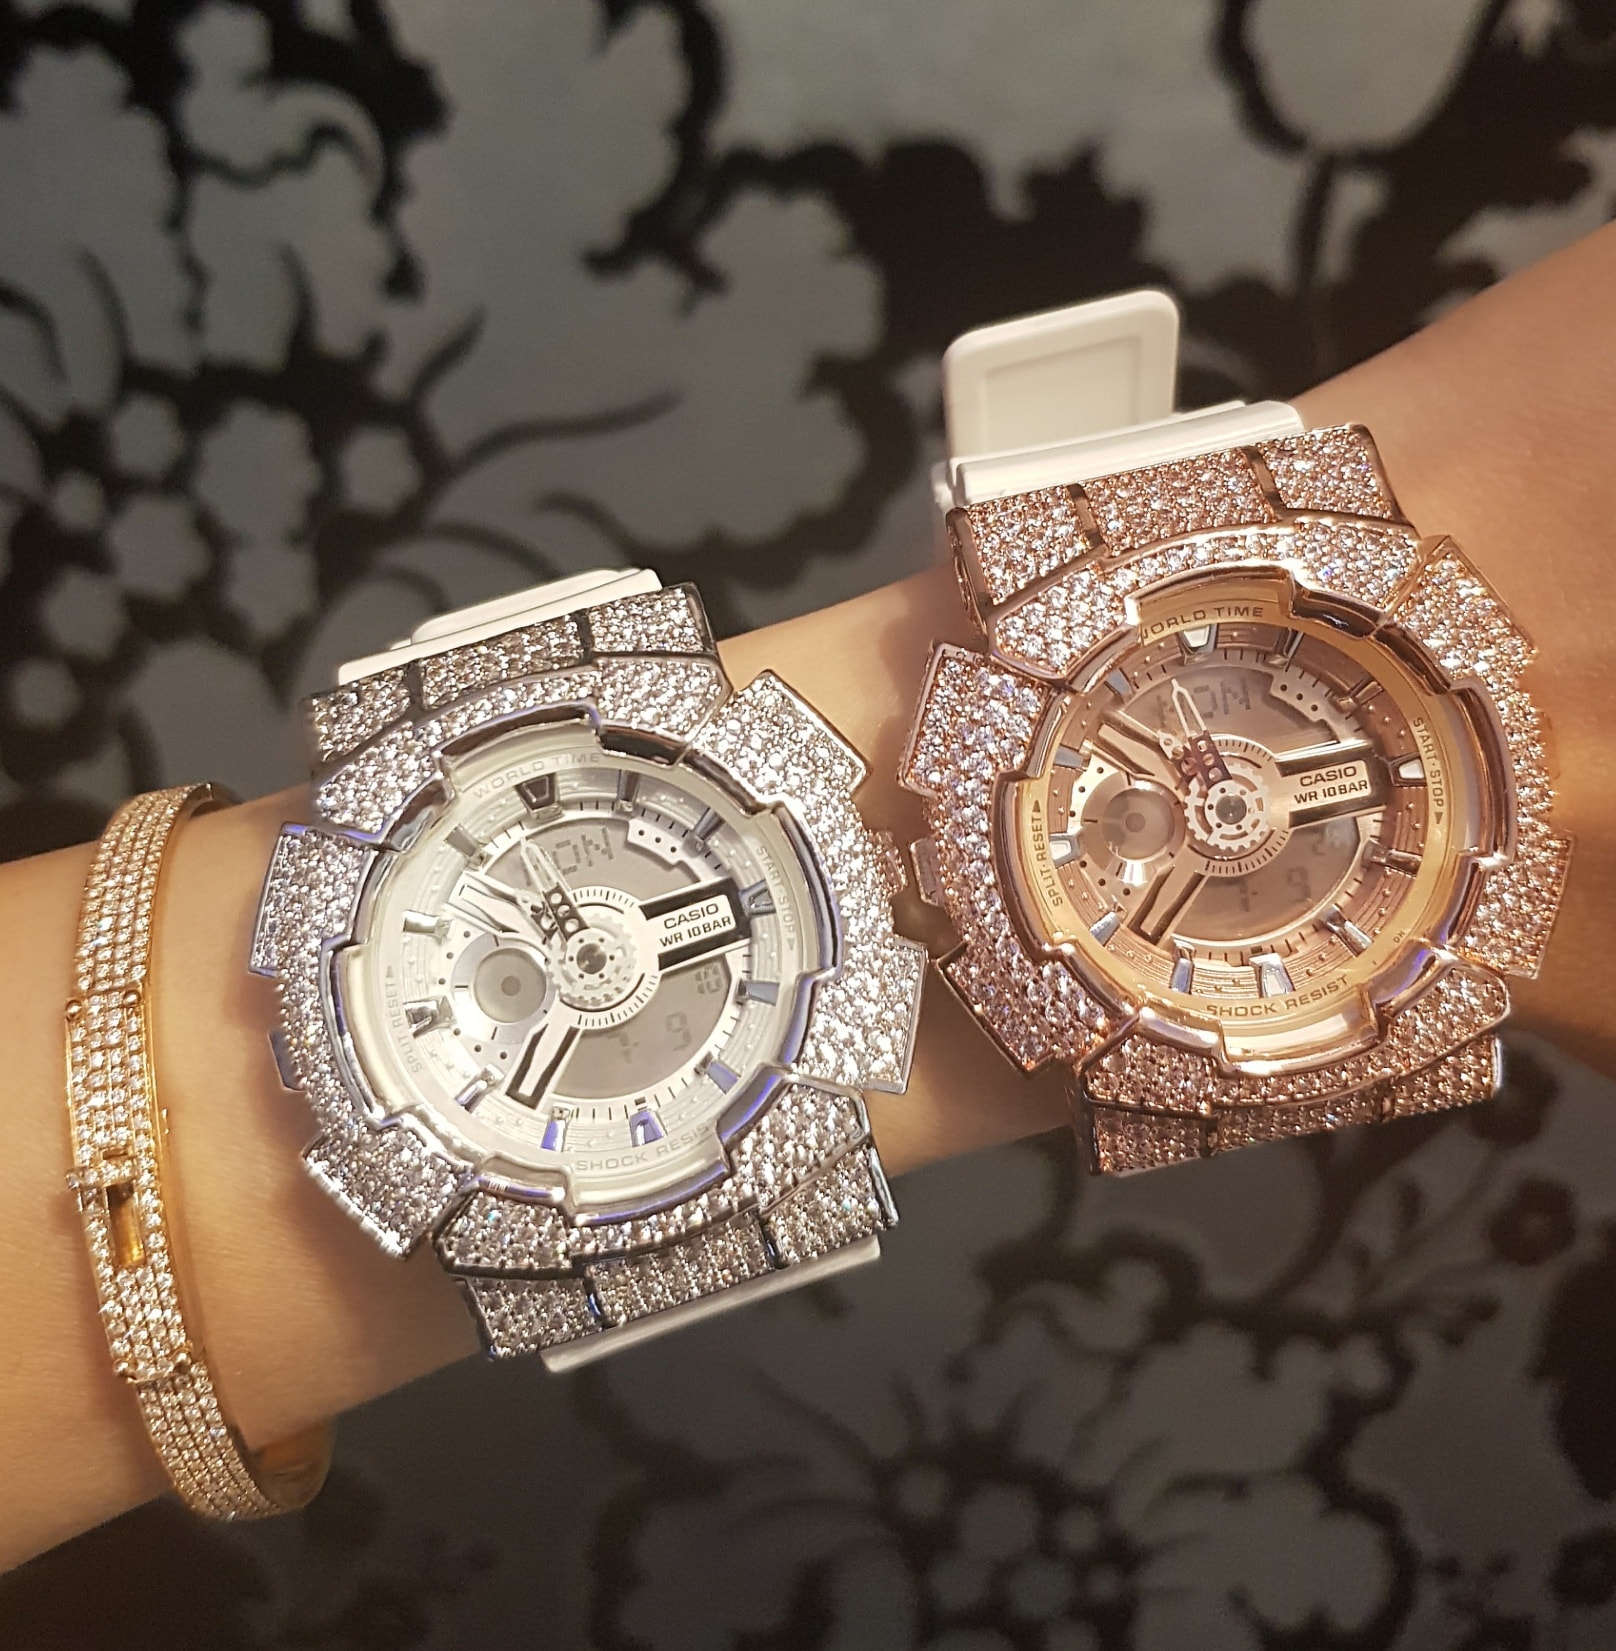 robot anker ethiek CUSTOMISED BEDAZZLED BABY-G & G-SHOCK WATCHES WITH SWAROVSKI GEMSTONES FROM  JUST $280! – Shout